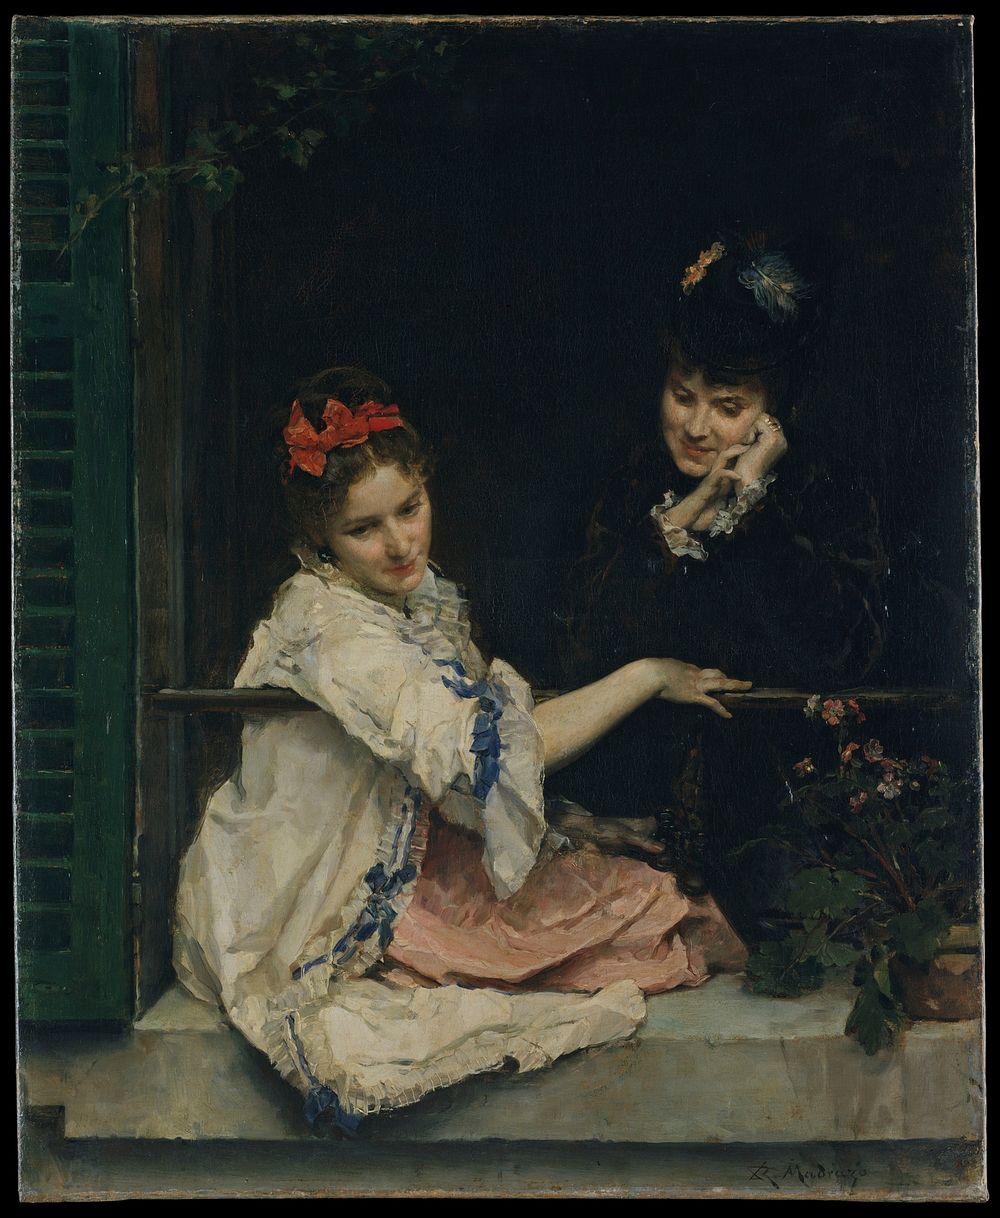 Girls at a Window